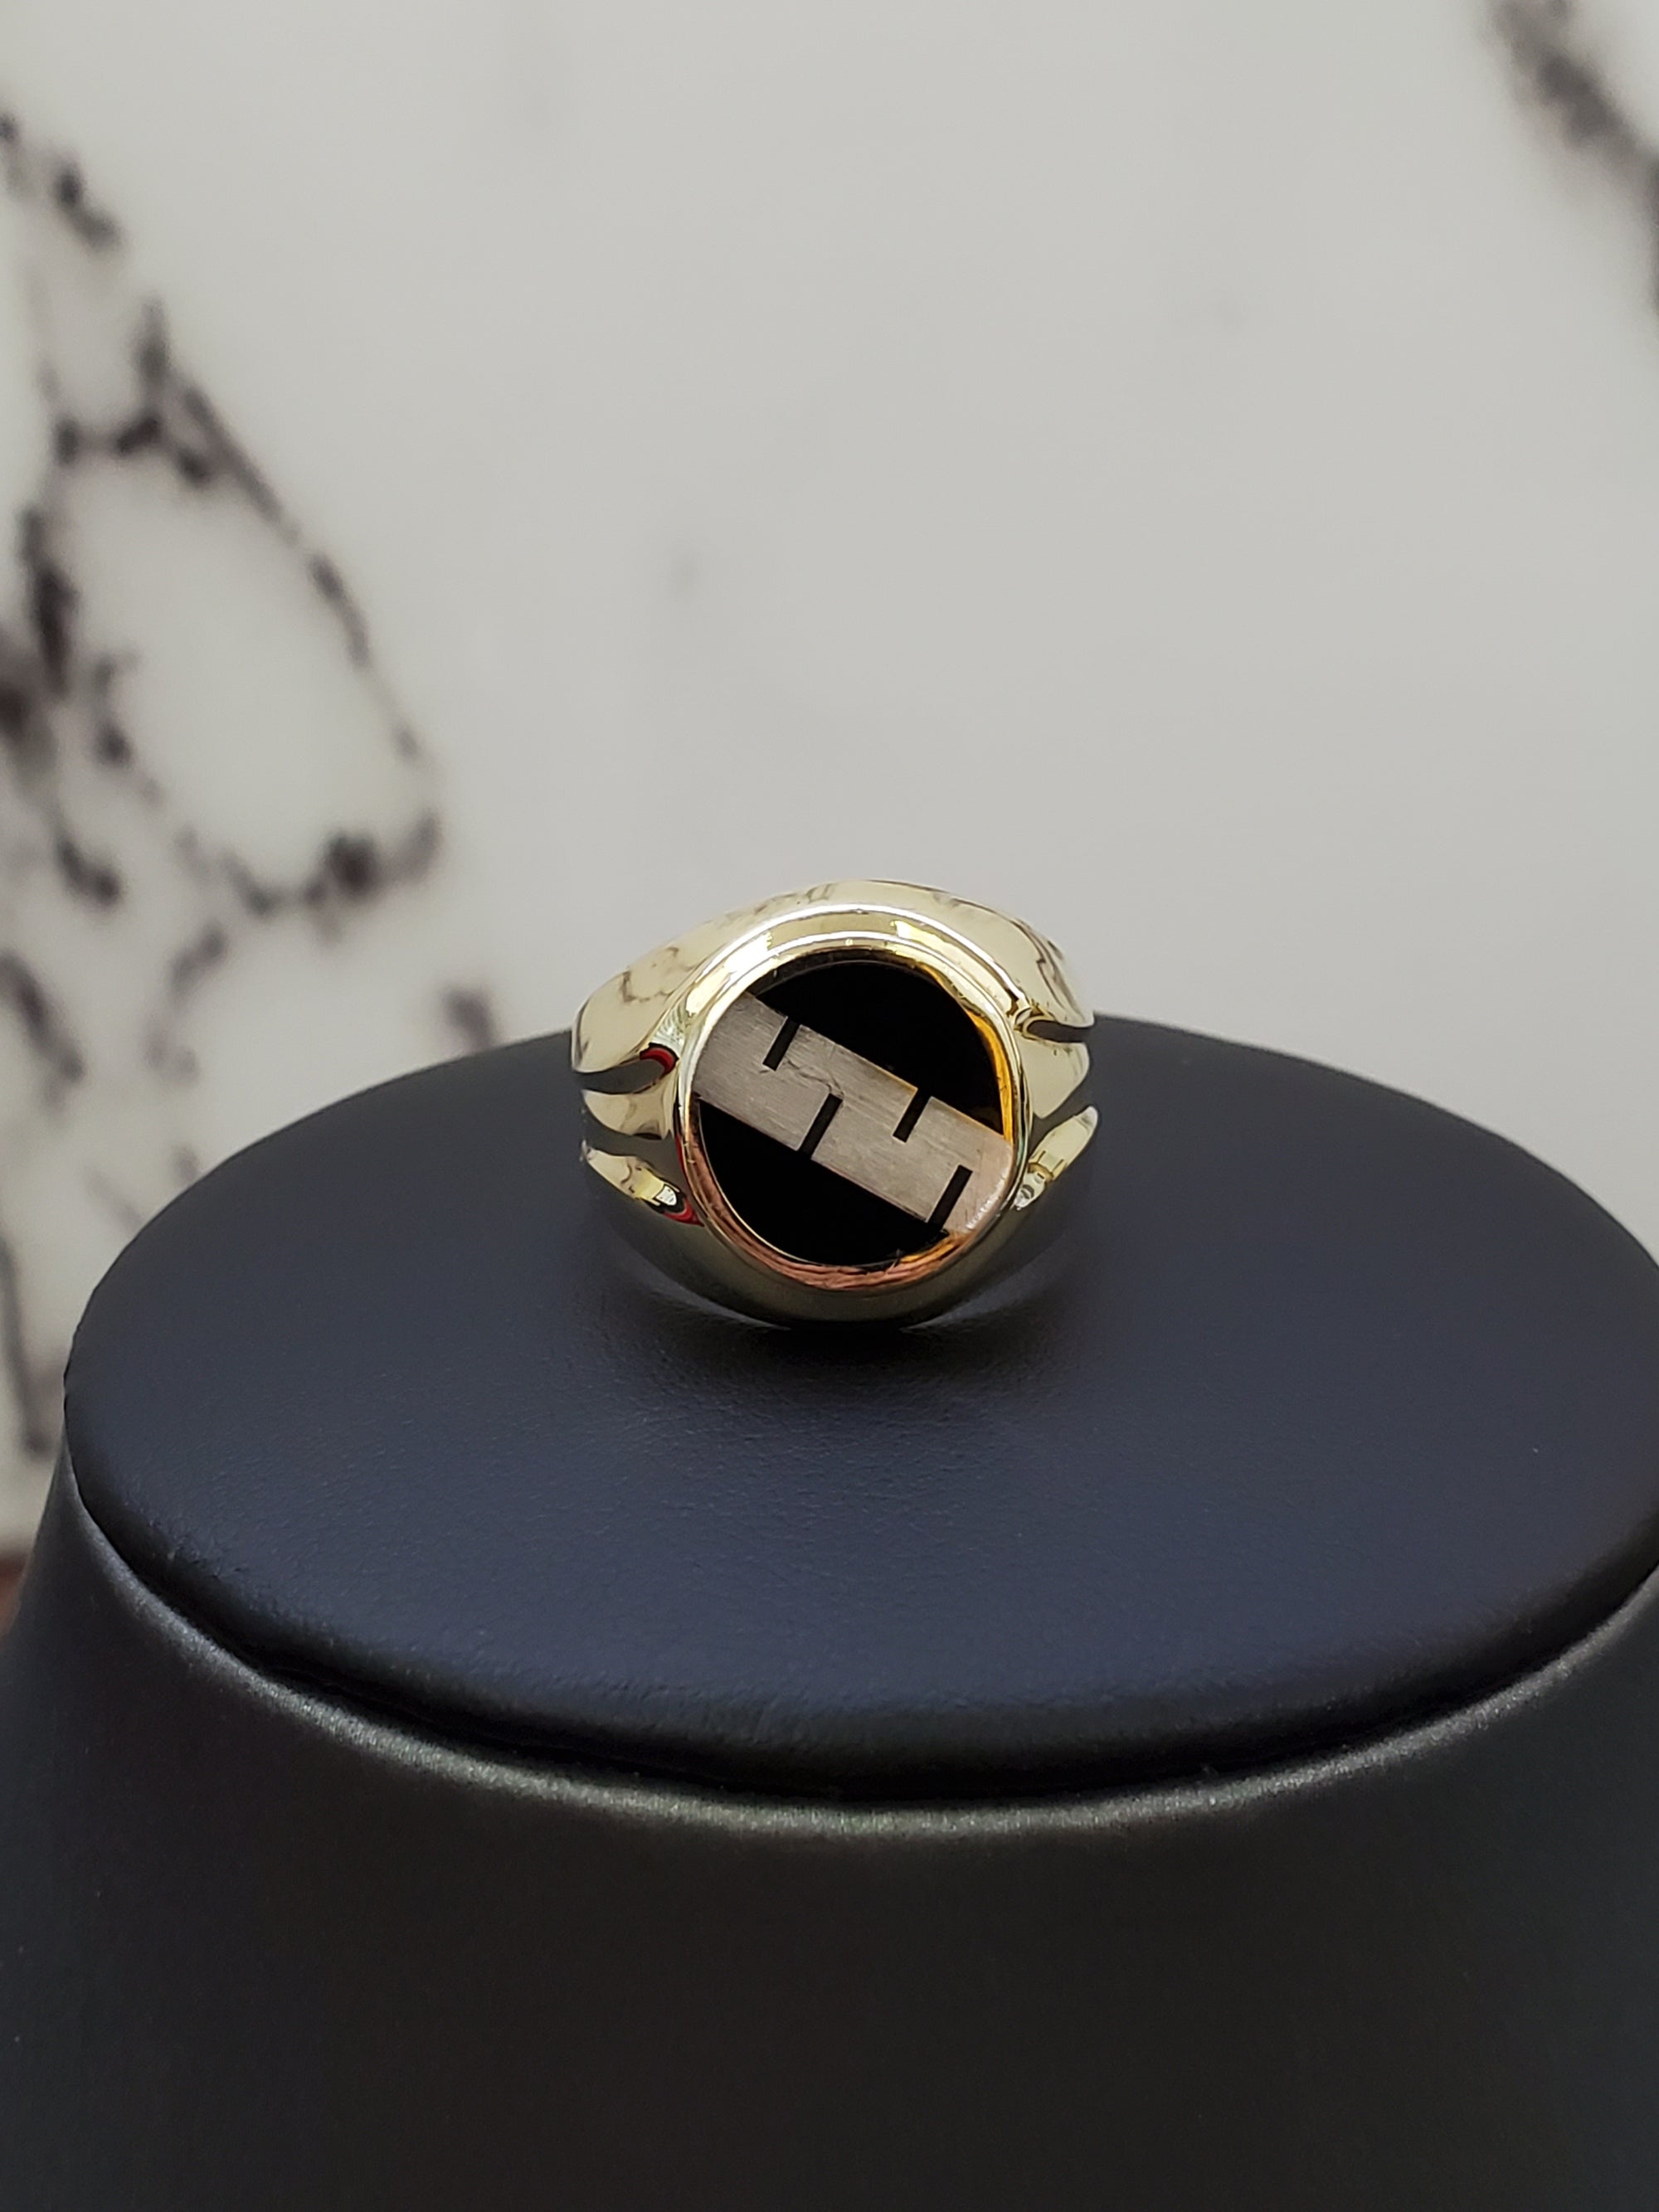 10K Solid Yellow Gold Round Fancy Black Onyx Men's Ring